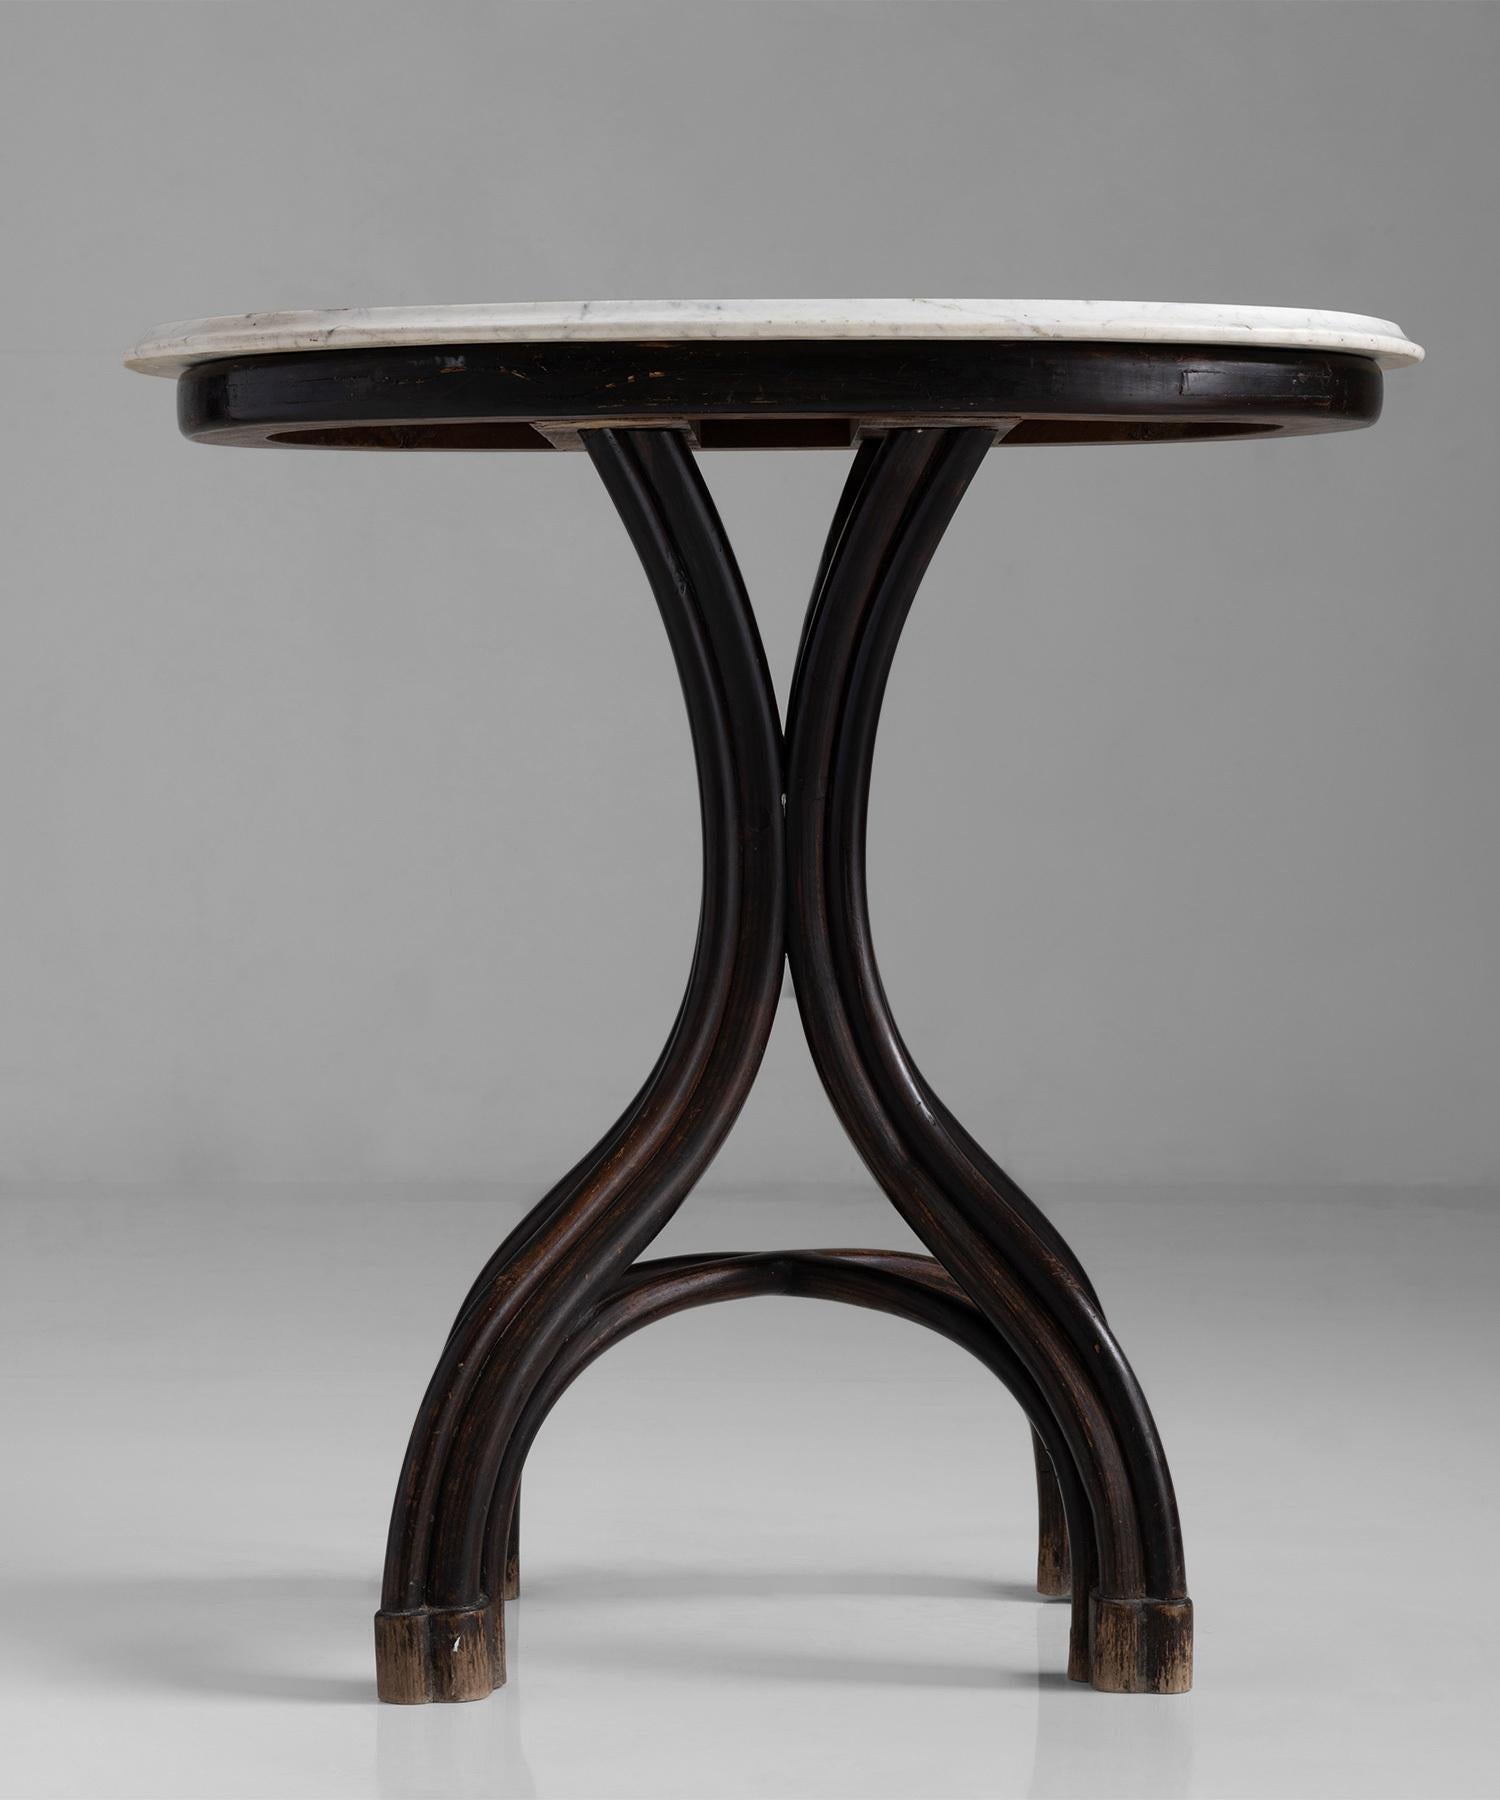 19th Century Bentwood with Marble Top Side Table by Thonet, Austria circa 1870